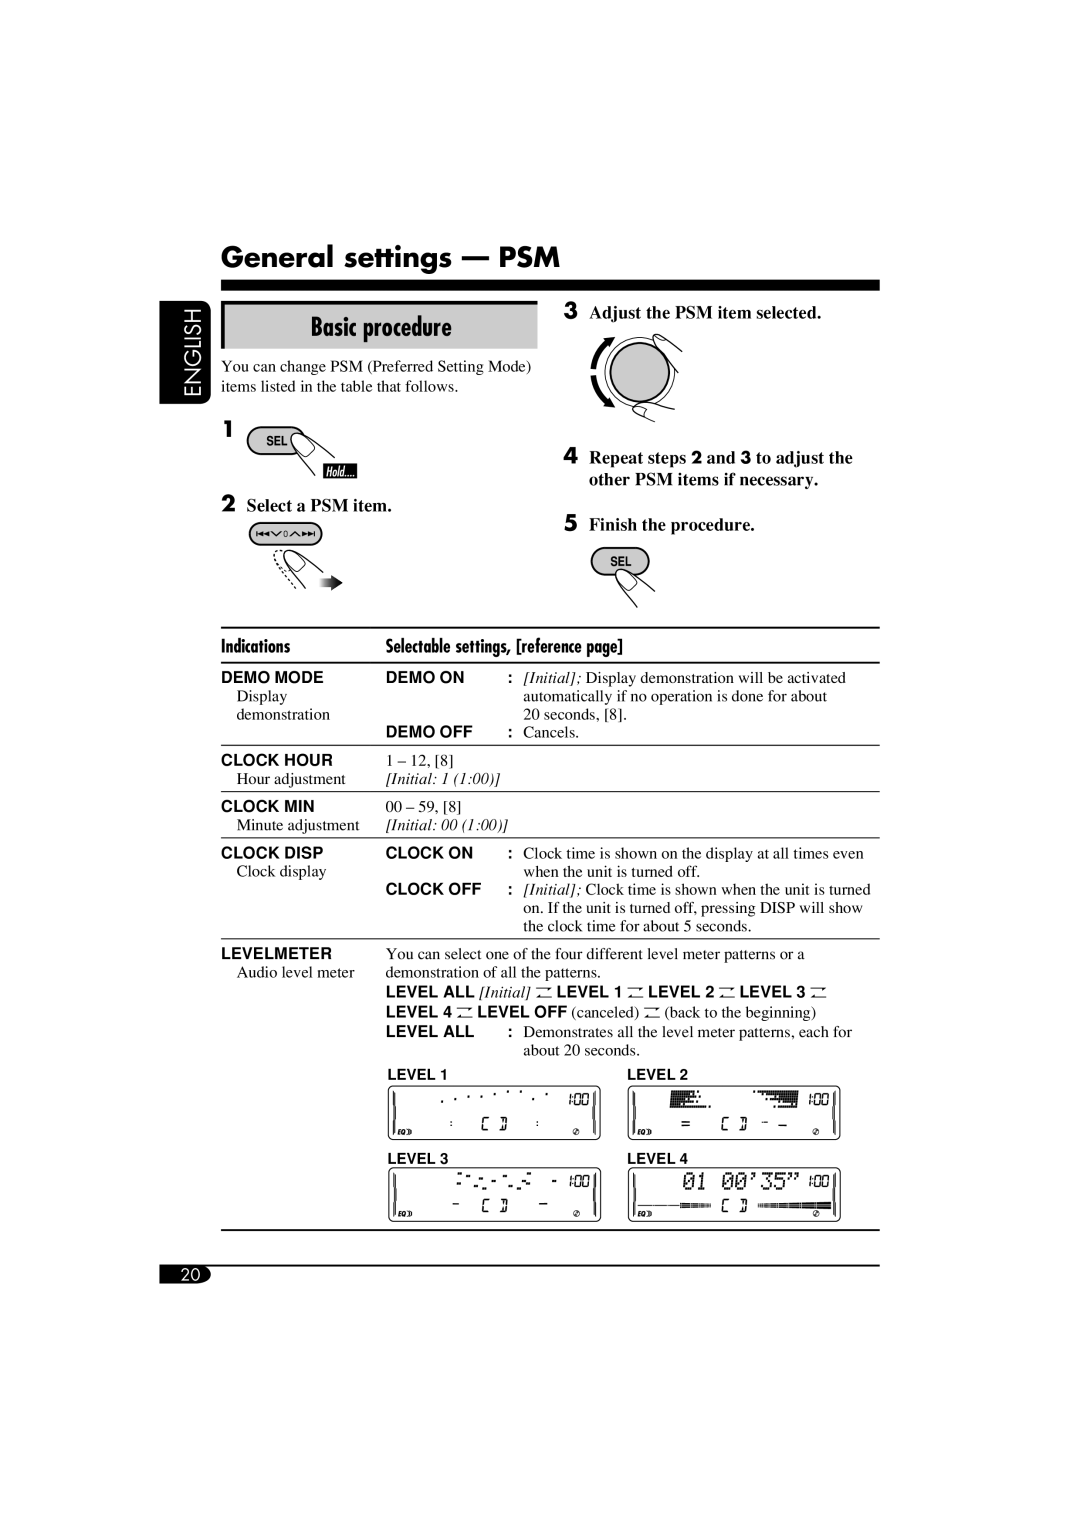 JVC KW-XC405, W-XC406 manual General settings - PSM, Basic procedure, English, Adjust the PSM item selected, Indications 